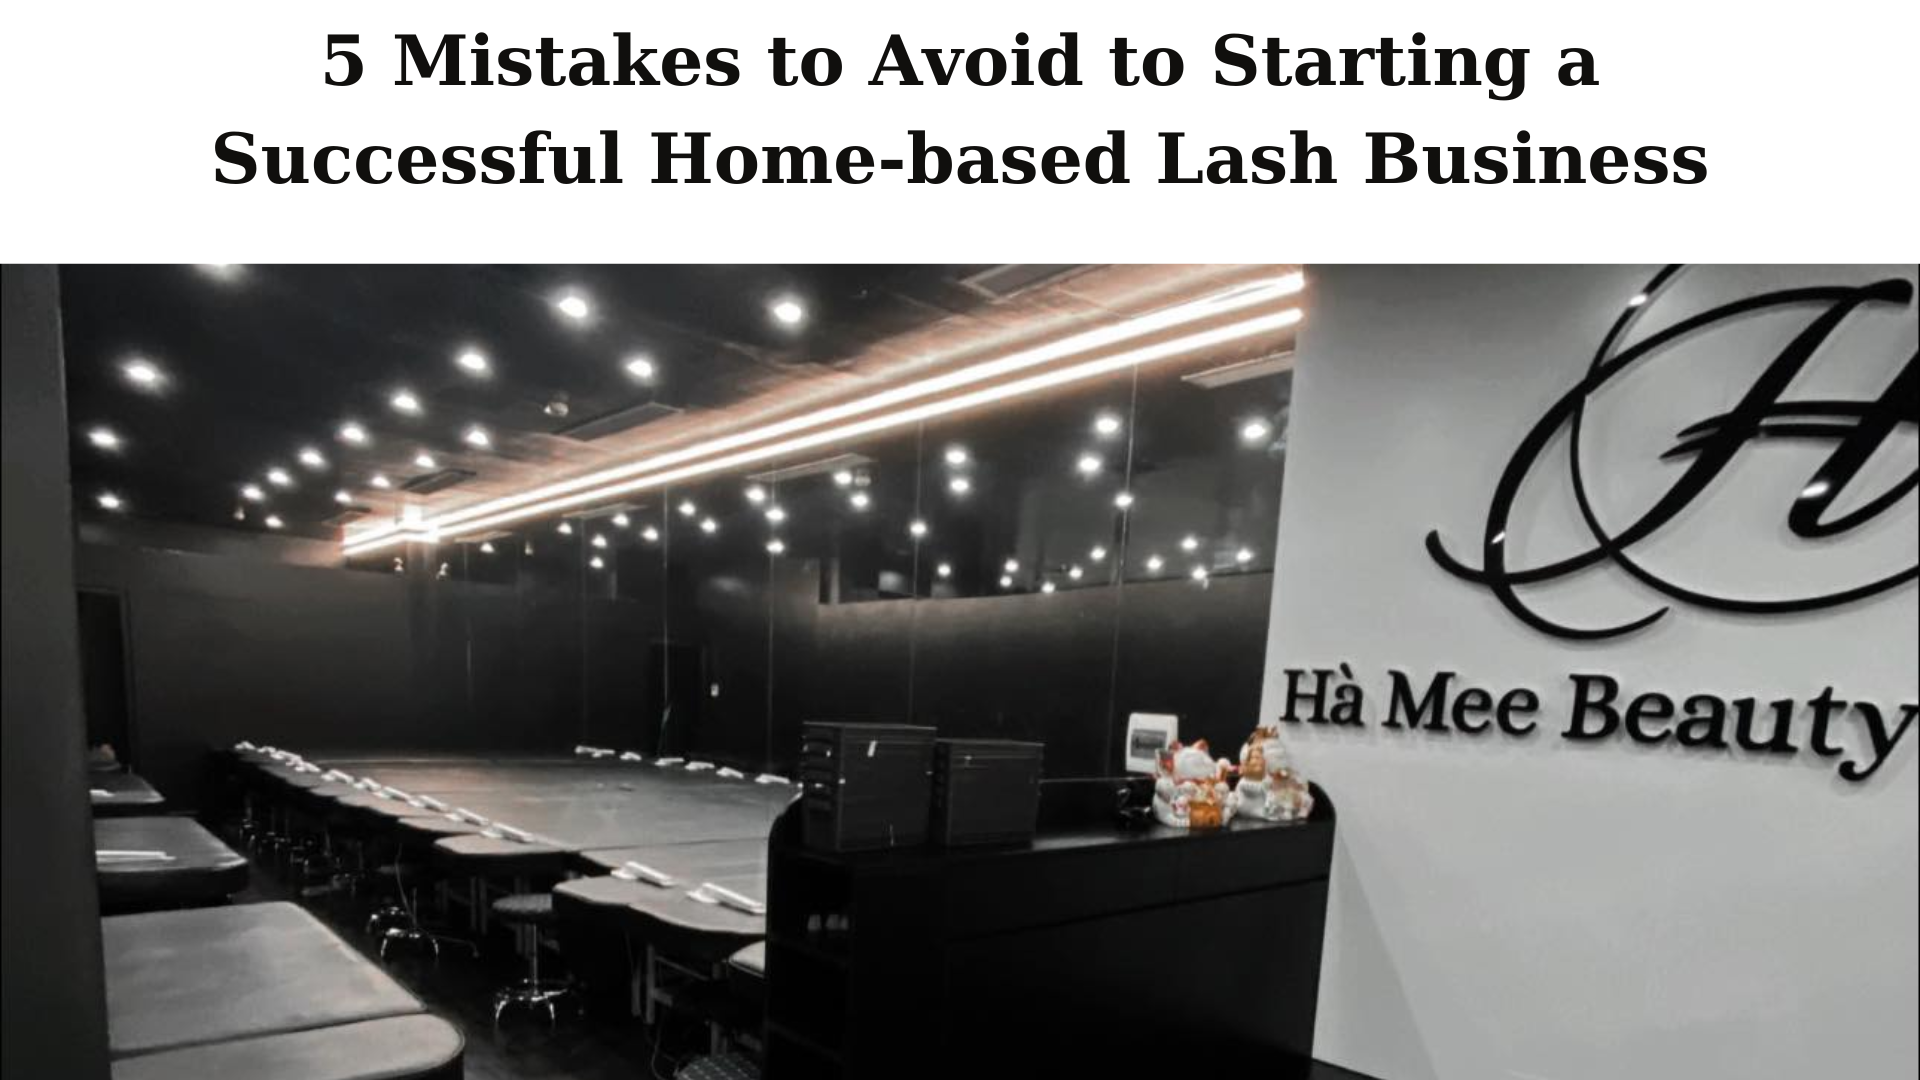 5 Mistakes to Avoid to Starting a Successful Home-based Lash Business